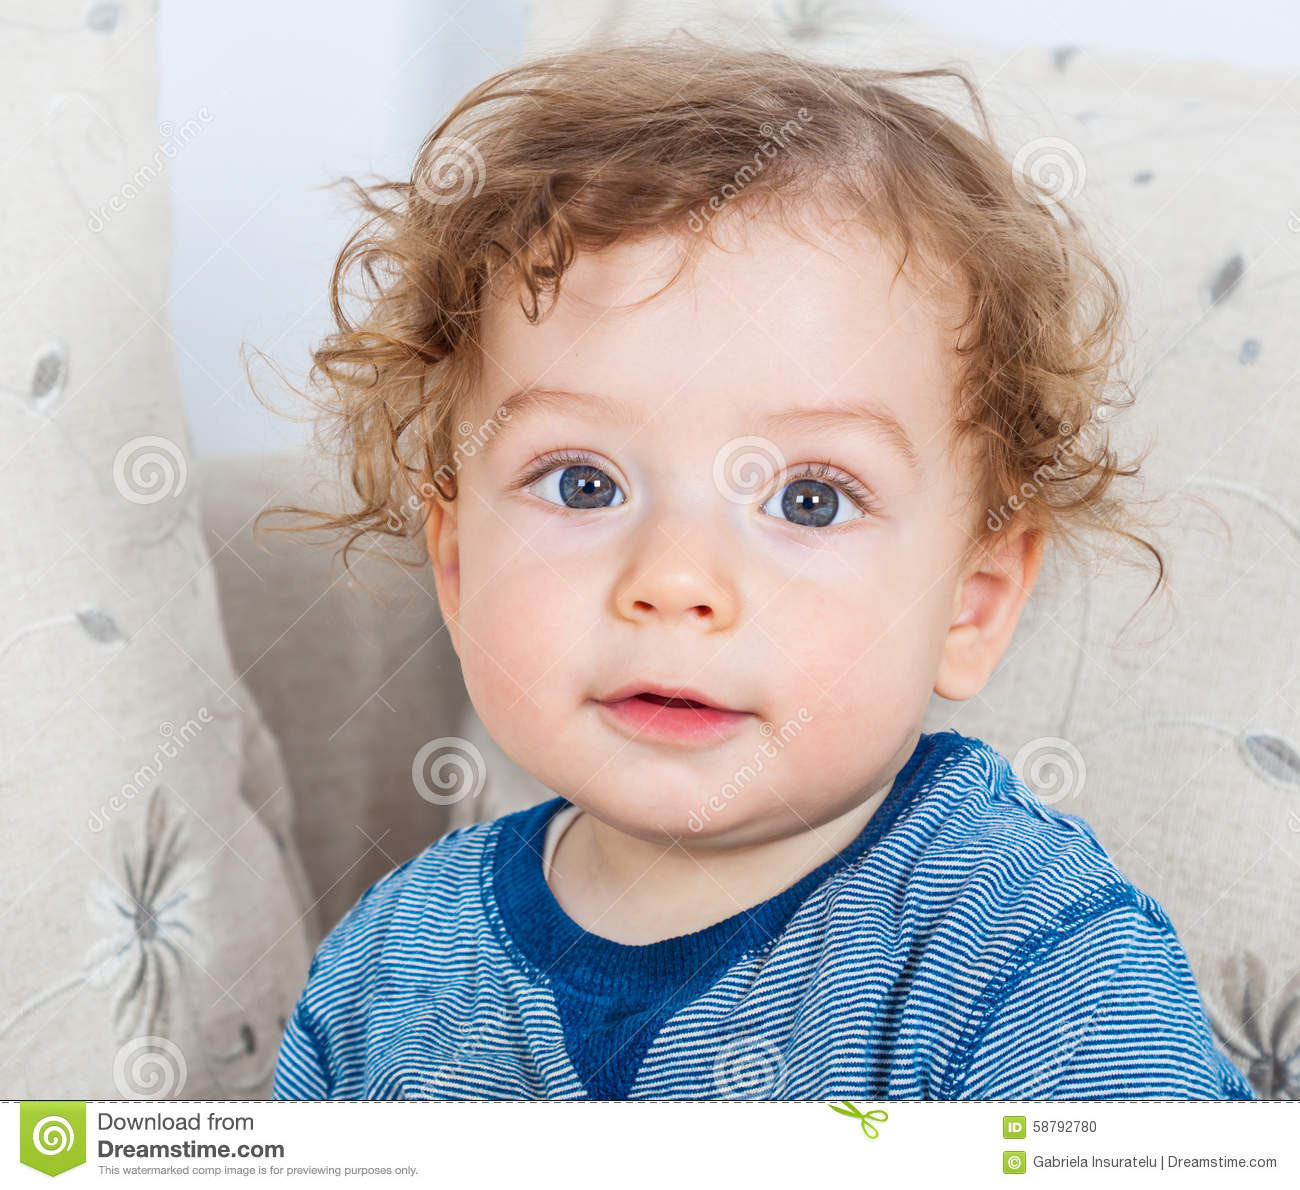 Curly Hair Baby Boys
 Baby boy with curly hair stock photo Image of emotion